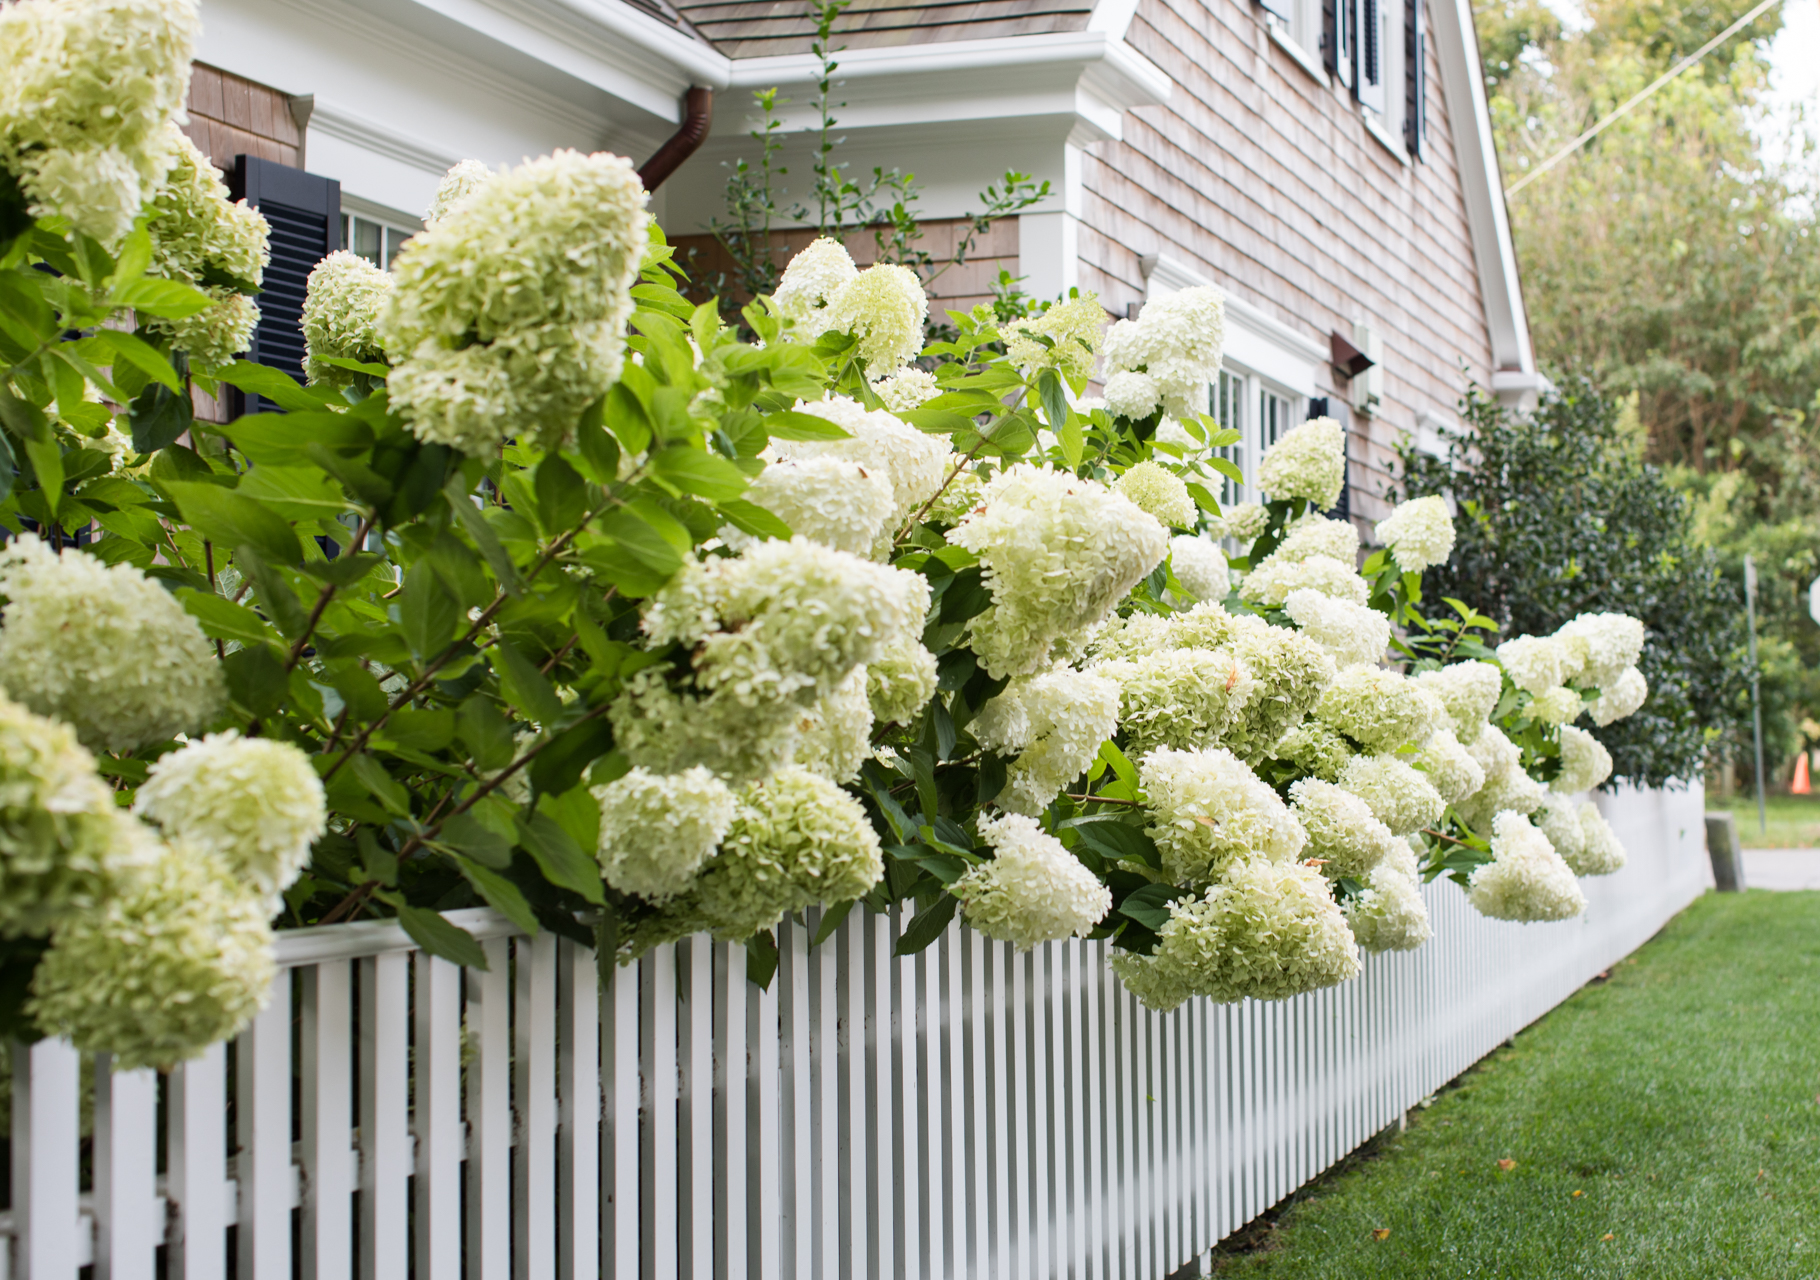 The 5 Best Things to do in Martha's Vineyard in October featured by top New England travel blogger, Shannon Shipman: image of vineyard hydrangeas